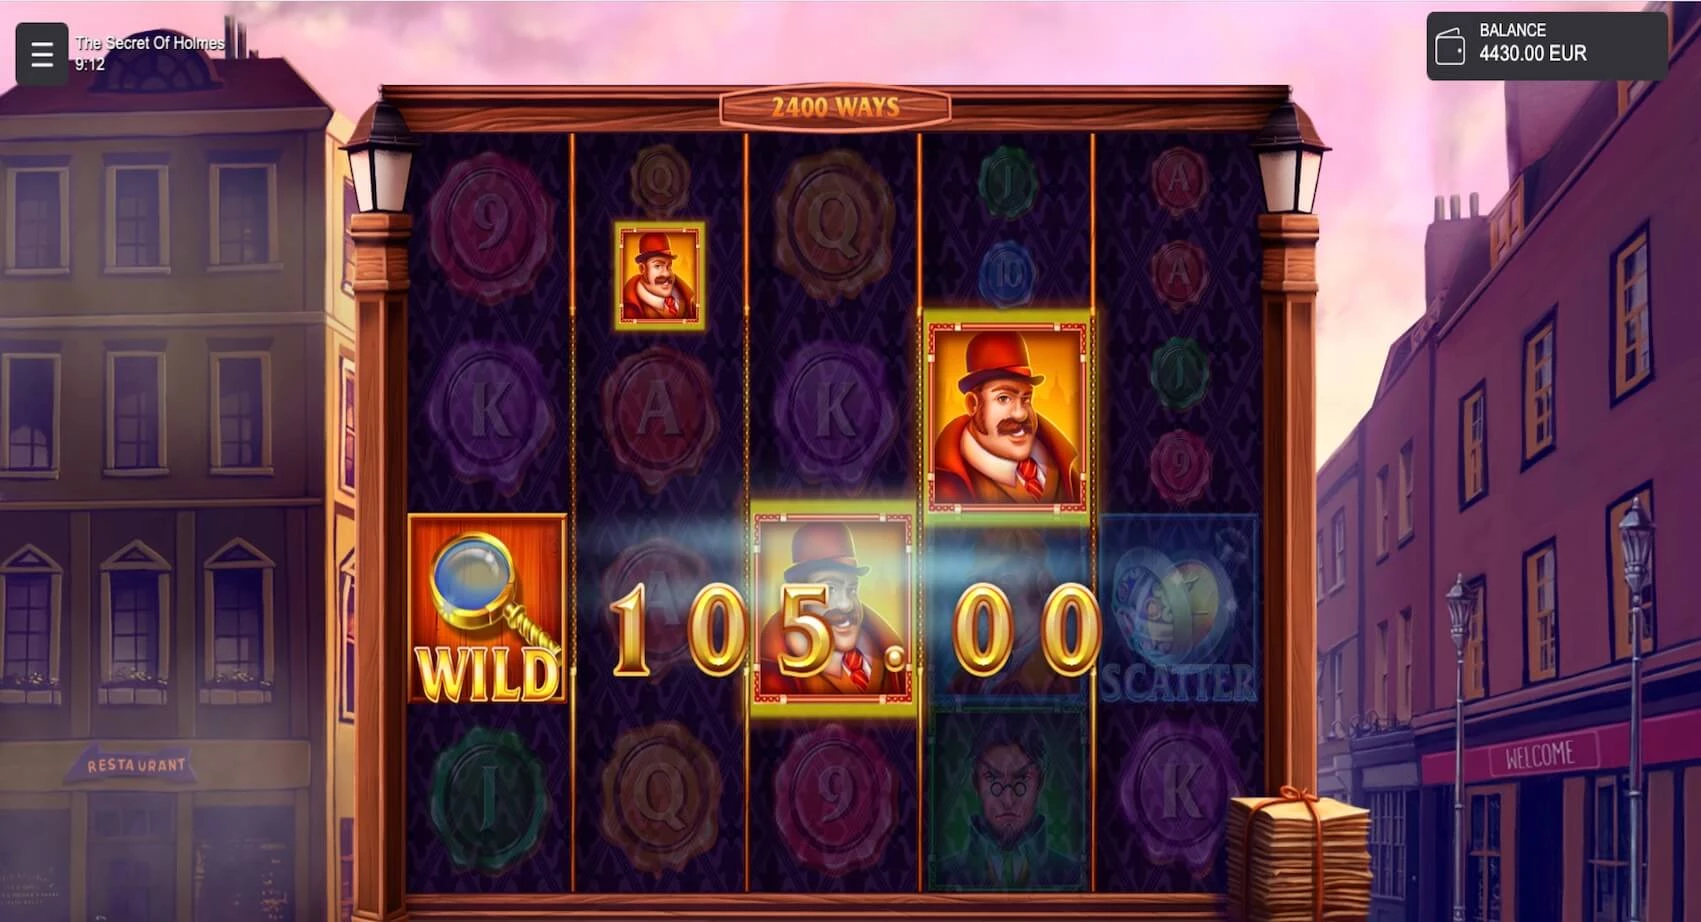 The Secret Of Holmes slot normal win